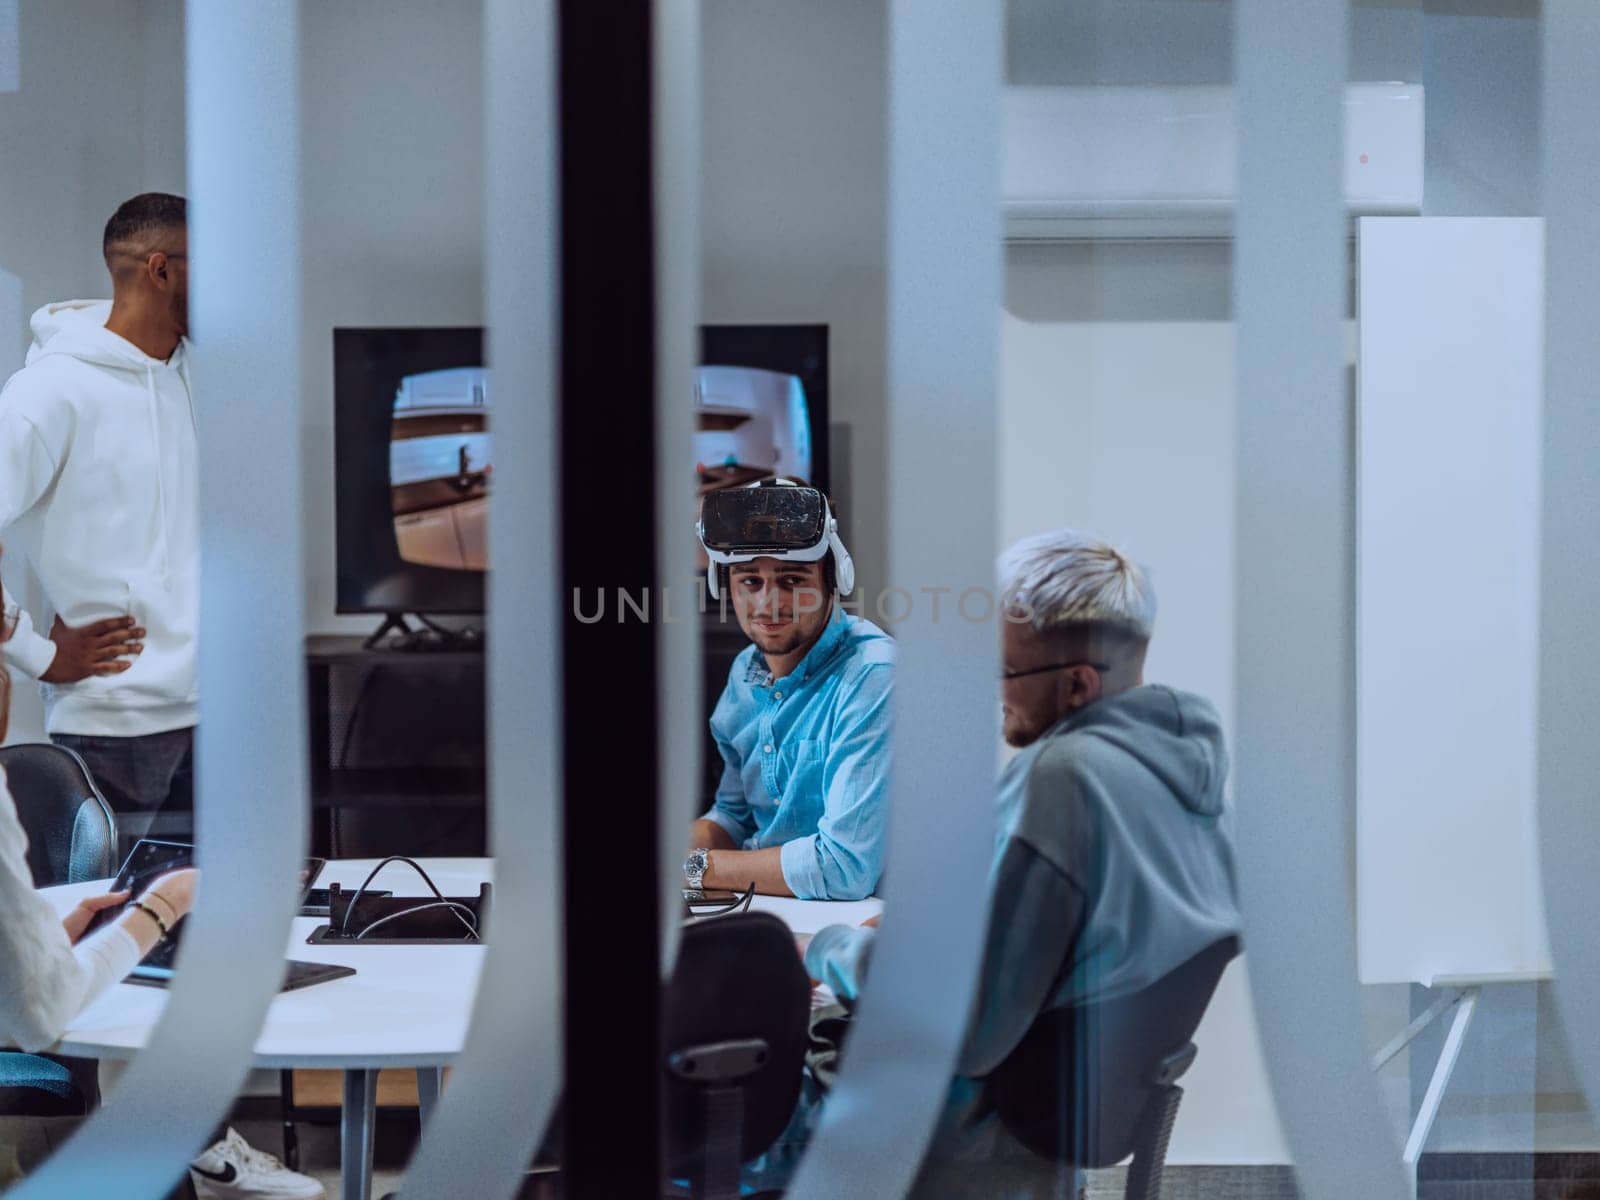 A diverse group of businessmen collaborates and tests a new virtual reality technology, wearing virtual glasses, showcasing innovation and creativity in their futuristic workspace.